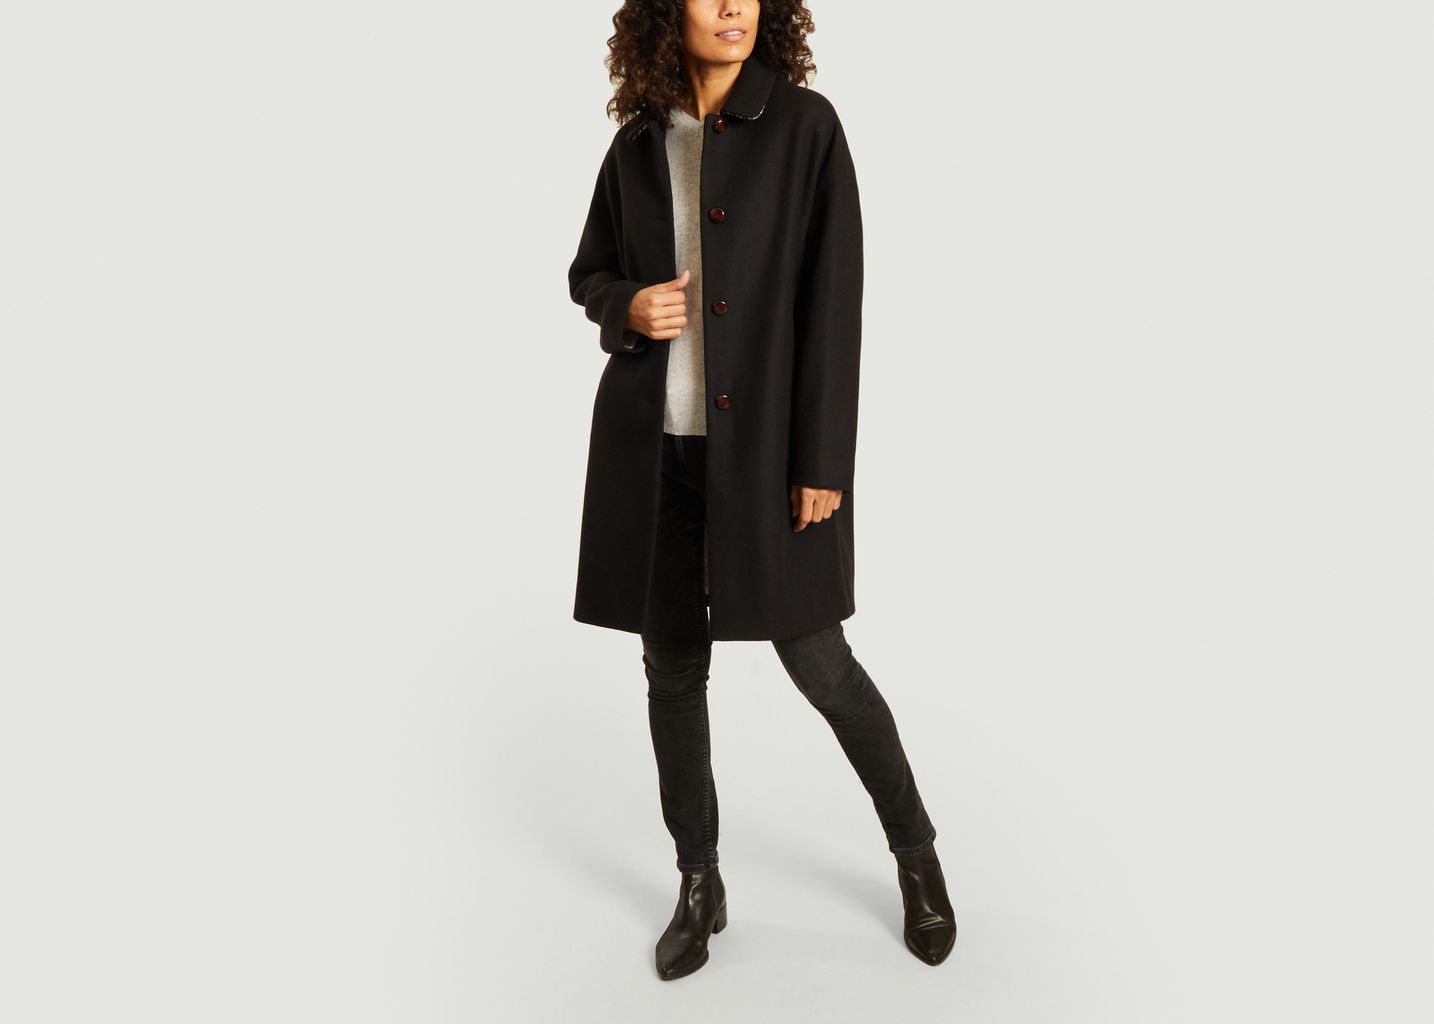 Chablis Schwarzer Mantel - Trench And Coat